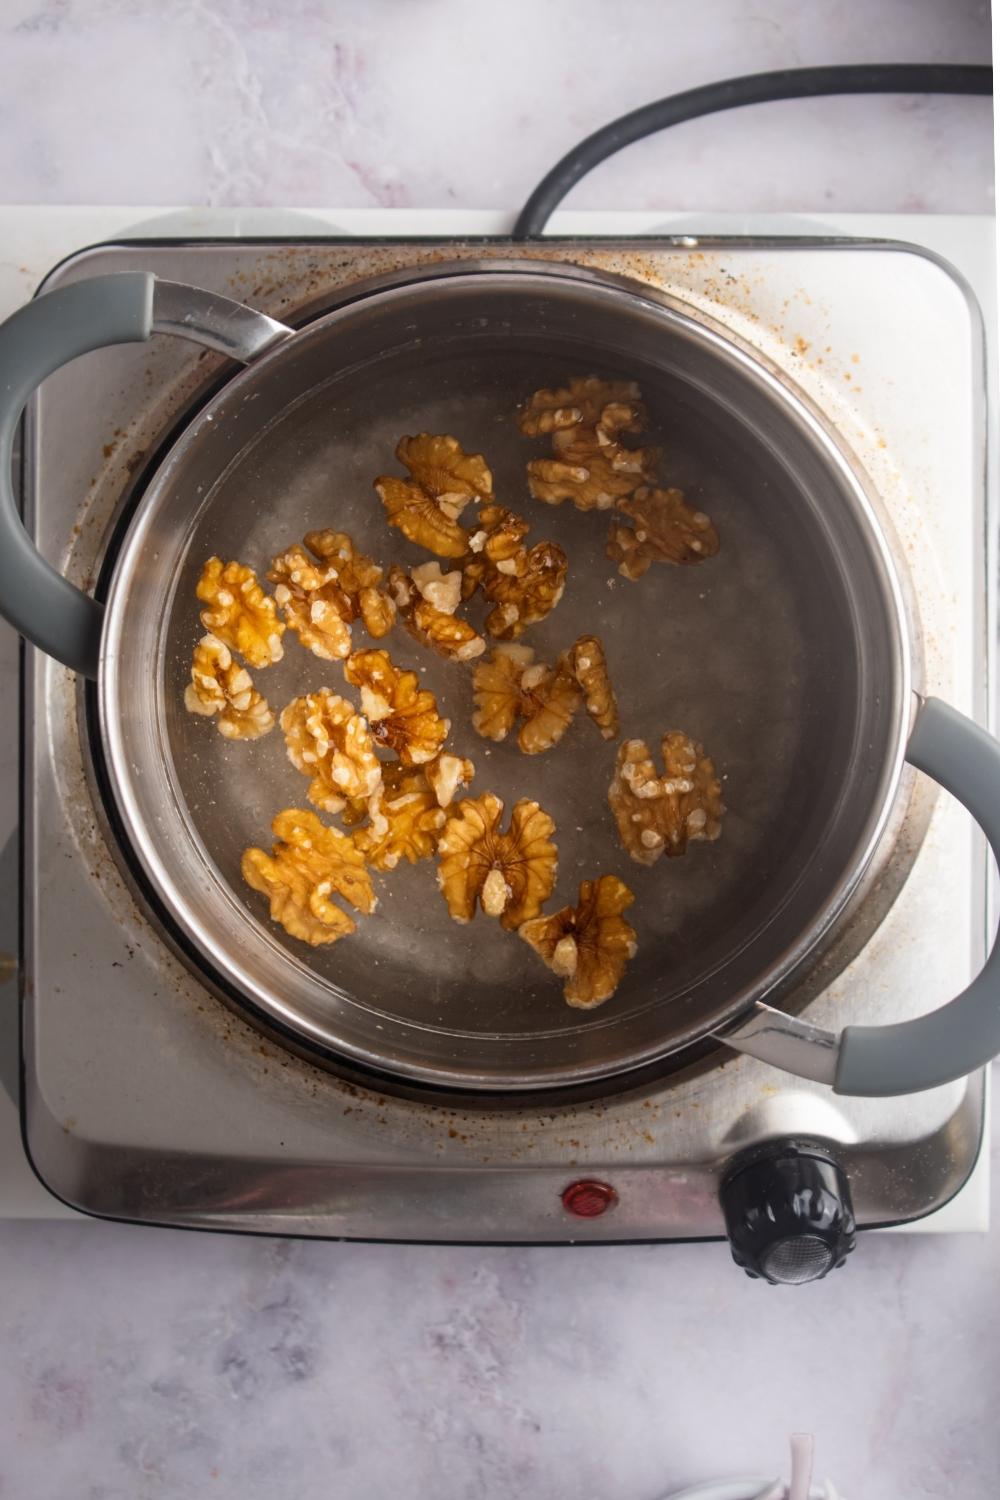 An overhead view of a pot with boiling water, sugar, and walnuts.